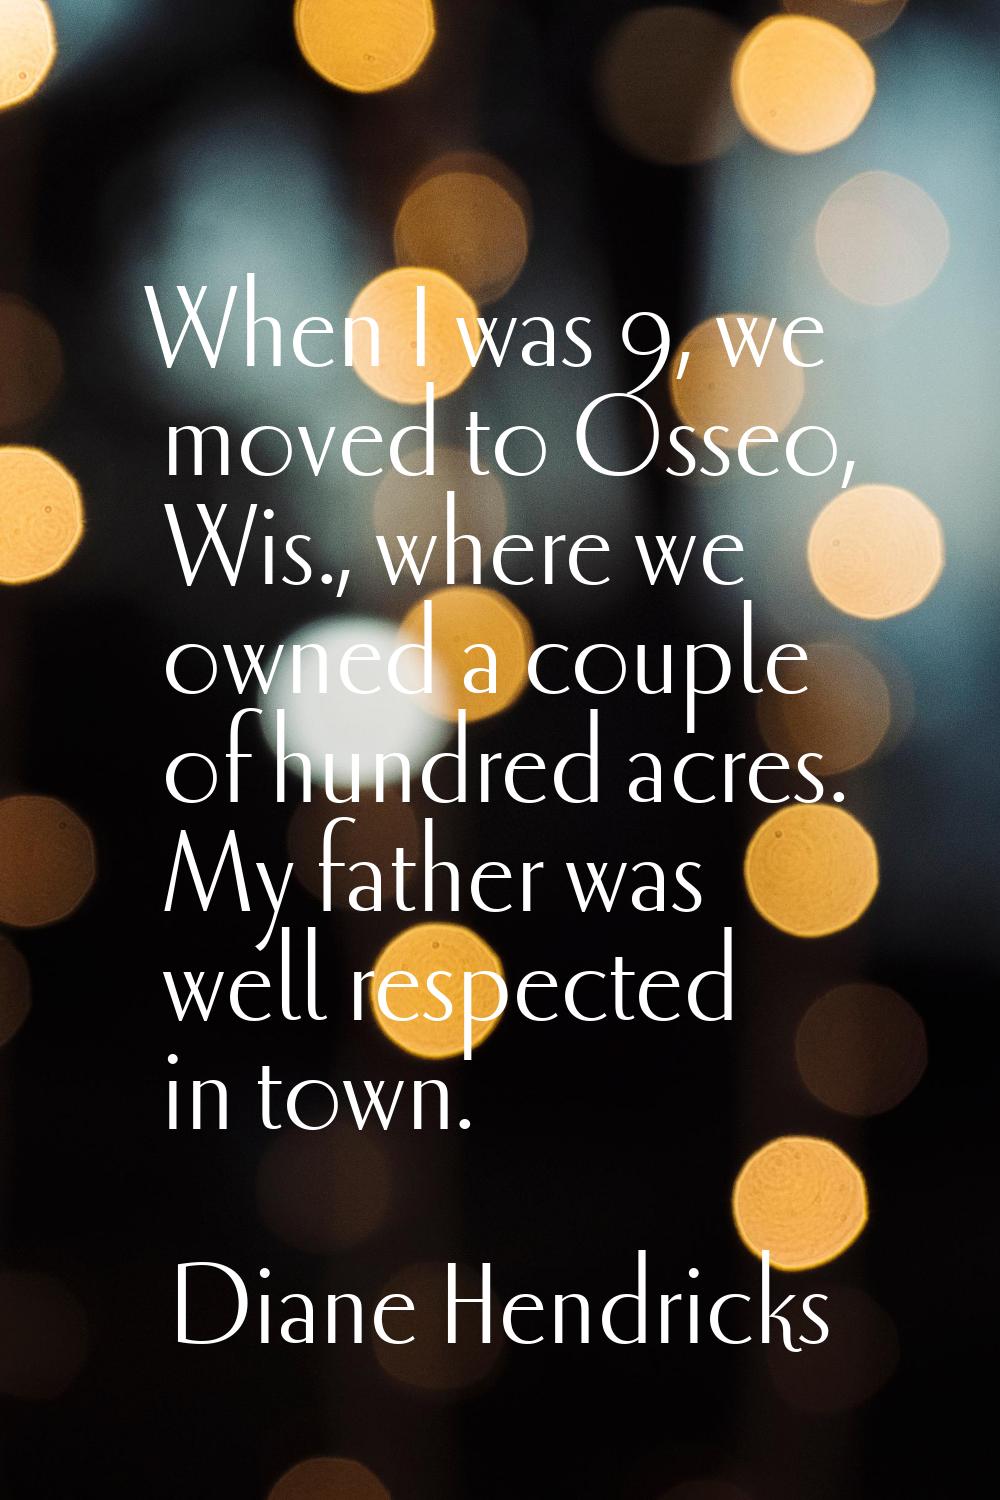 When I was 9, we moved to Osseo, Wis., where we owned a couple of hundred acres. My father was well